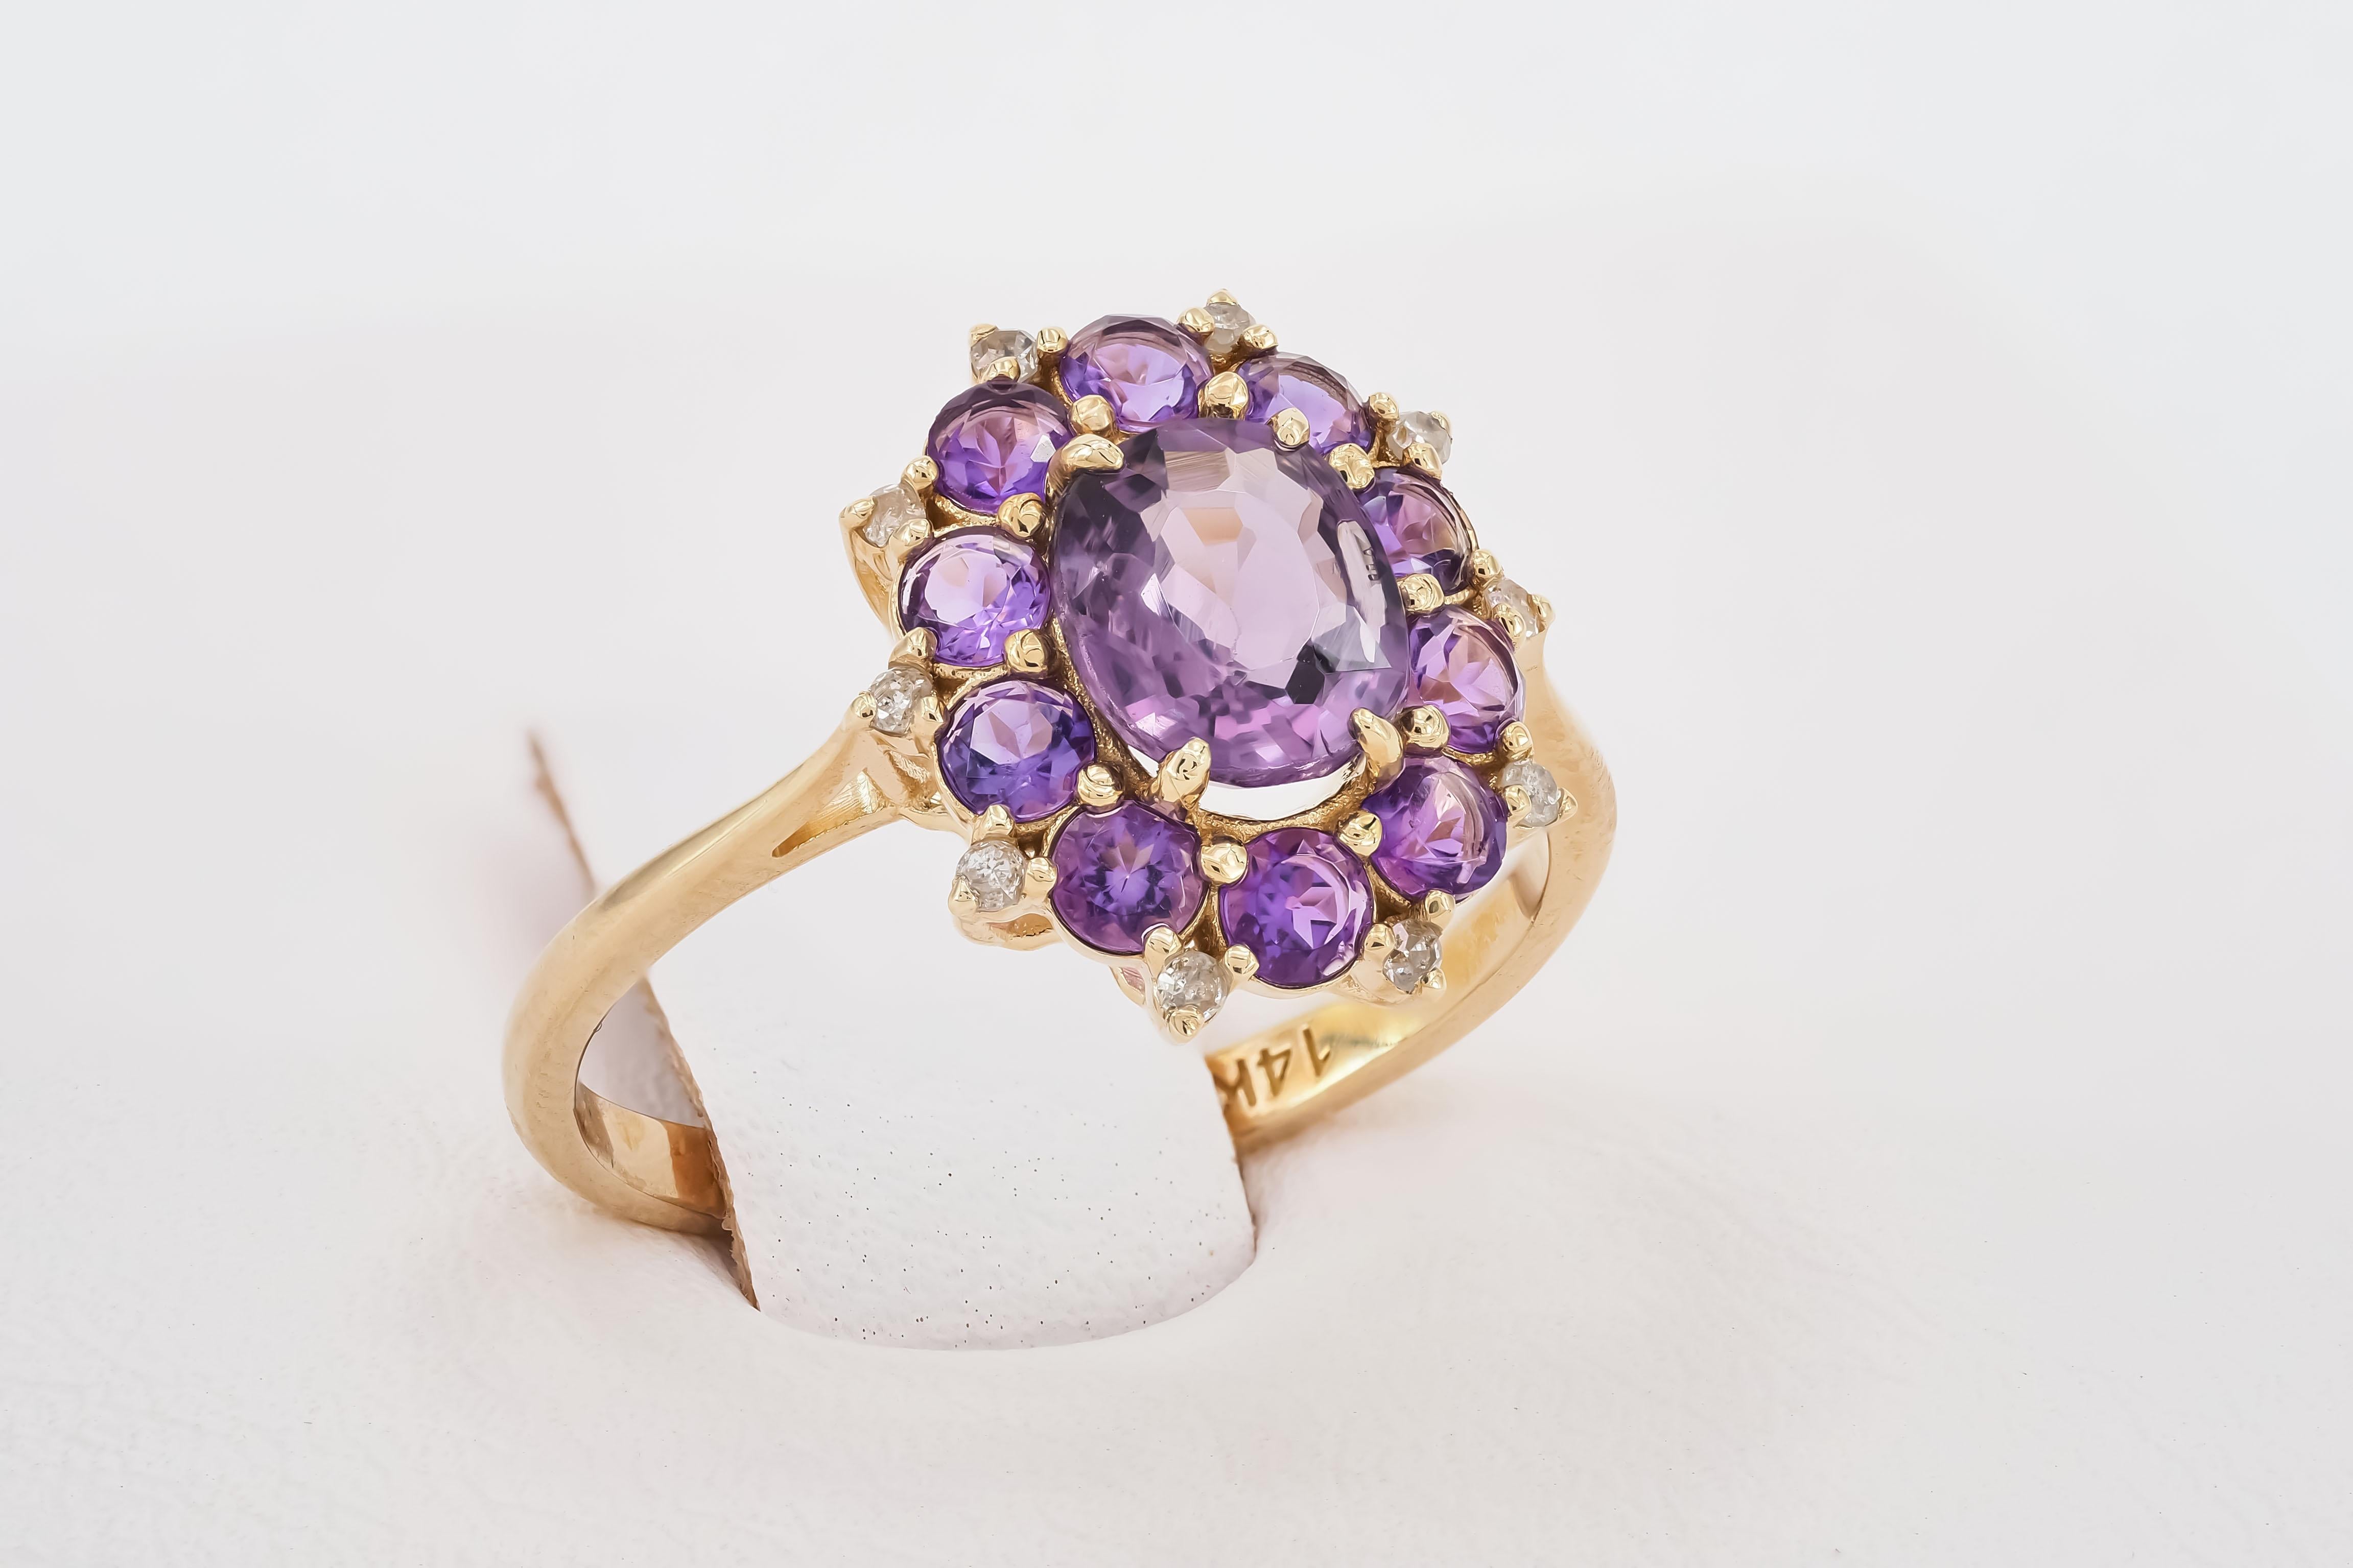 Women's Lavender Spinel Gold Ring, 14k Gold Ring with Spinel, Amethyst and Diamonds